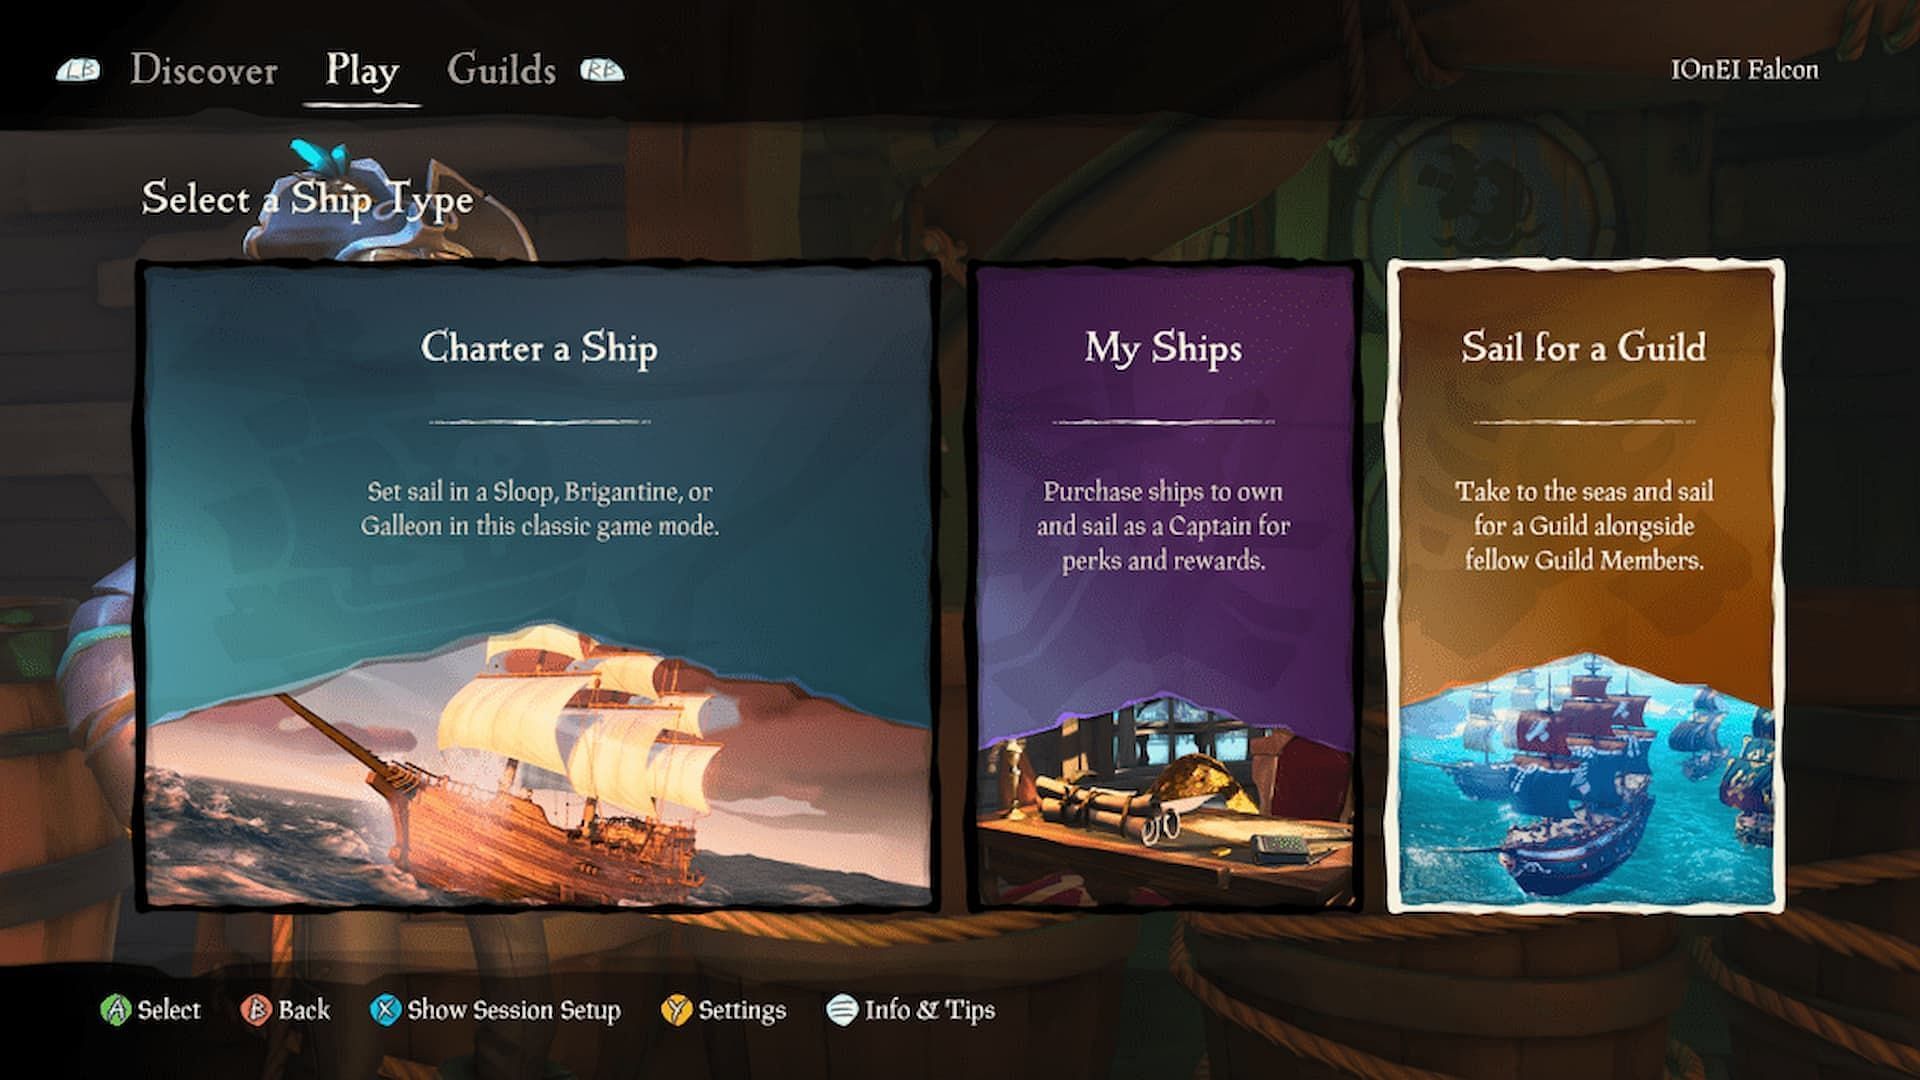 You can sail ship for a specific guild (Image via Rare)